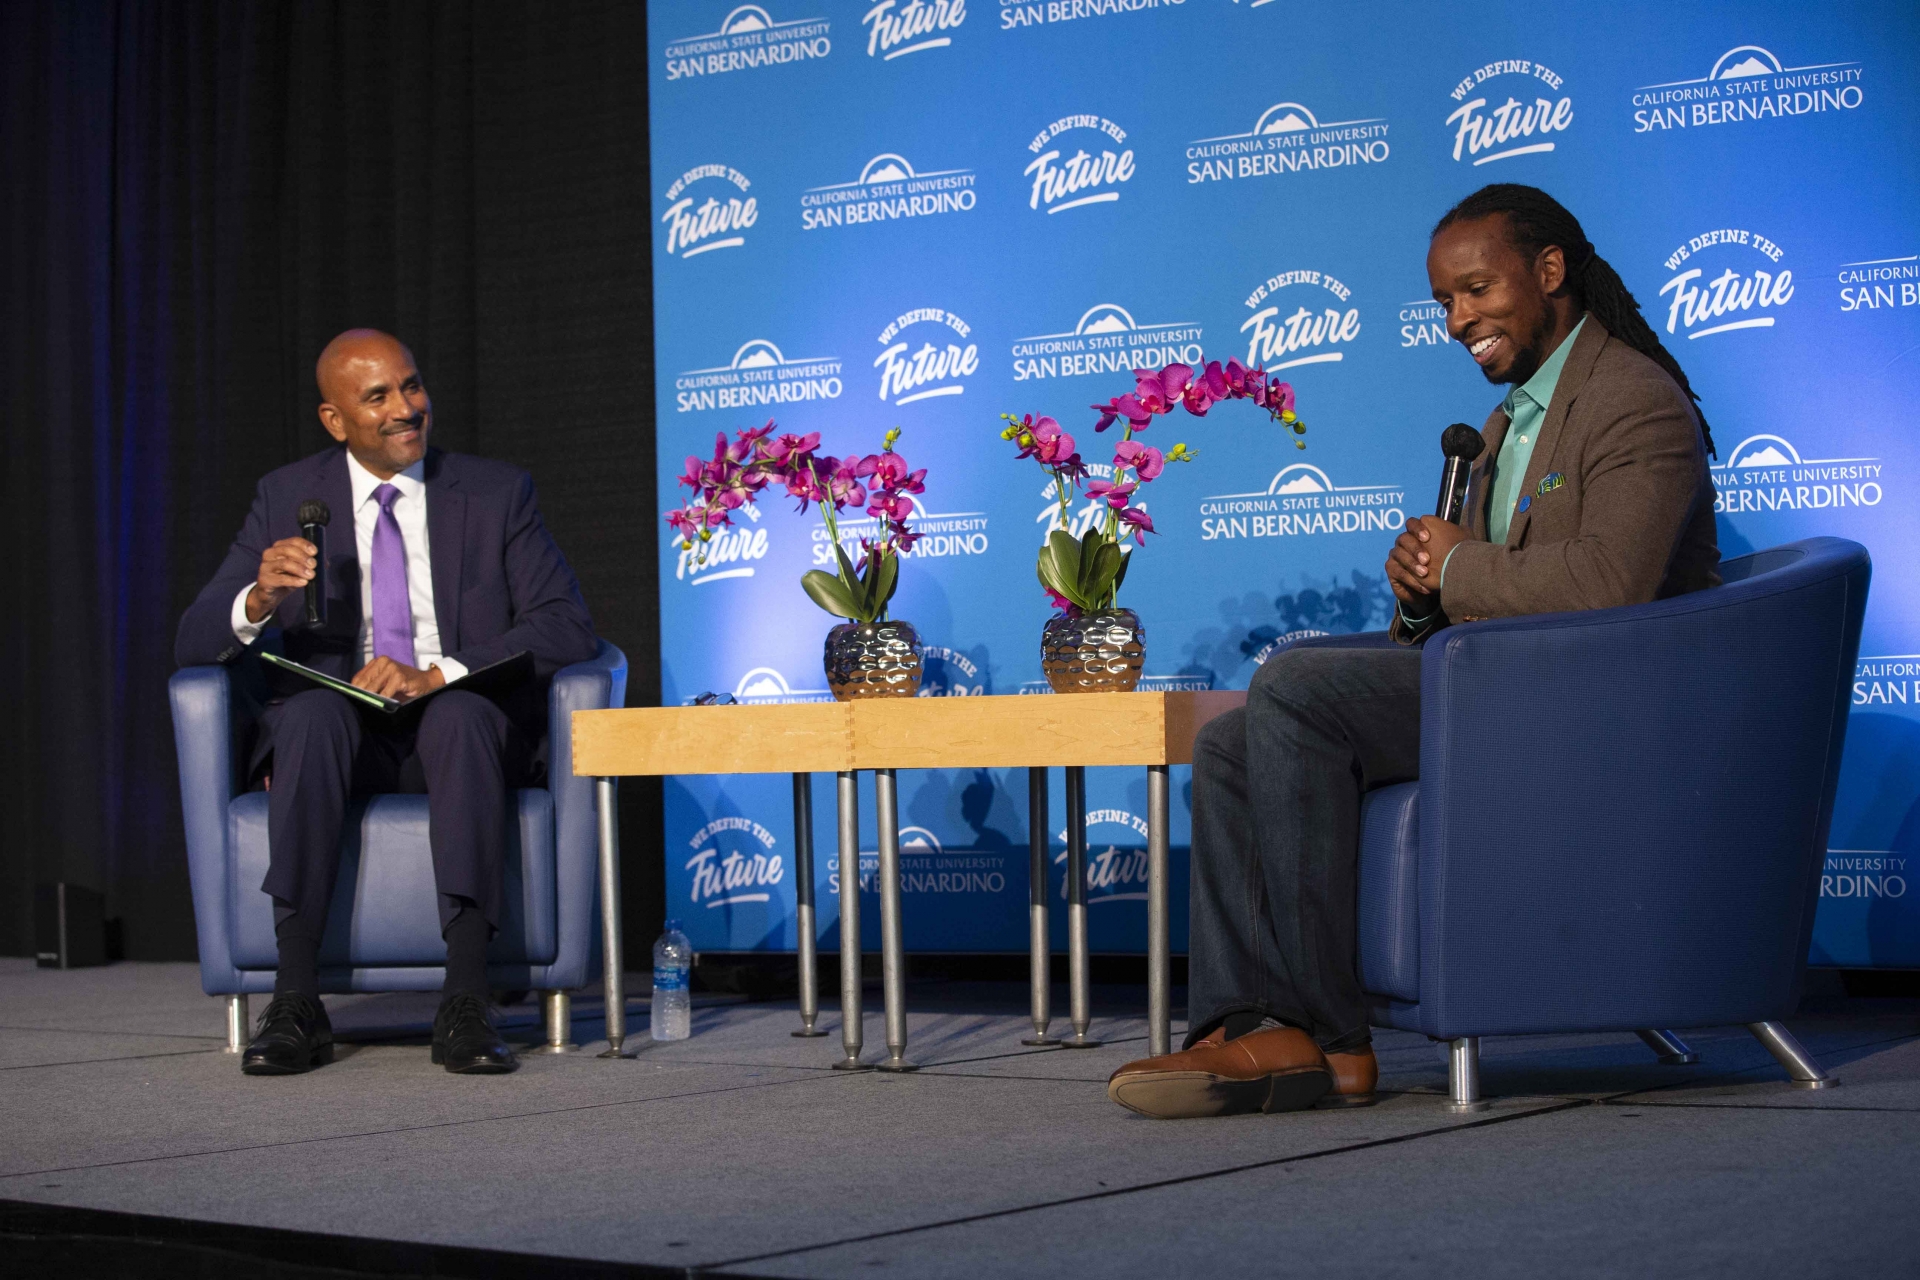 Rafik Mohamed, dean of CSUSB's College of Social and Behavioral Sciences, and Ibram X. Kendi during a Q-and-A session.